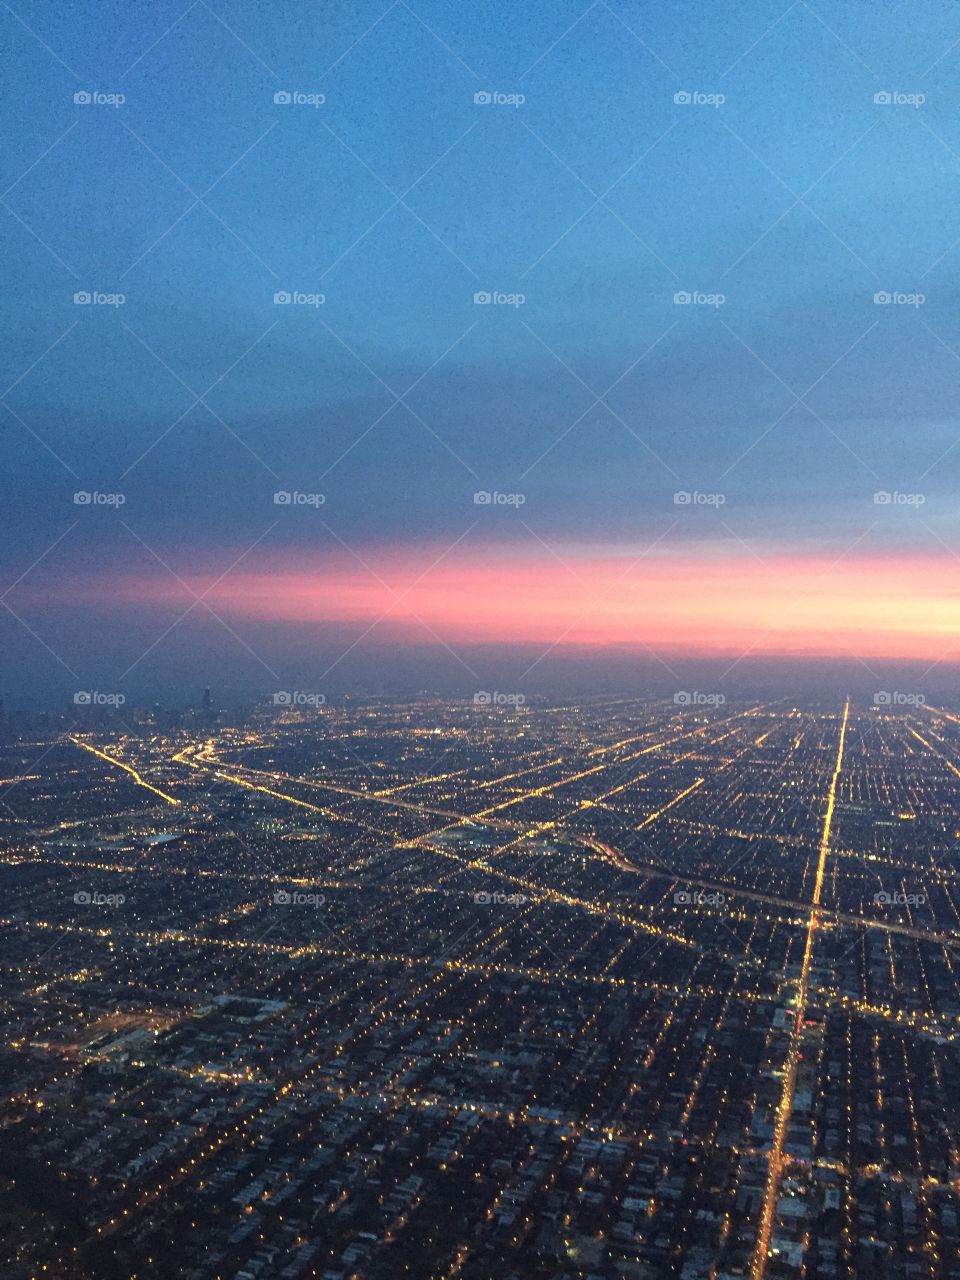 View from plane- Chicago sunset
